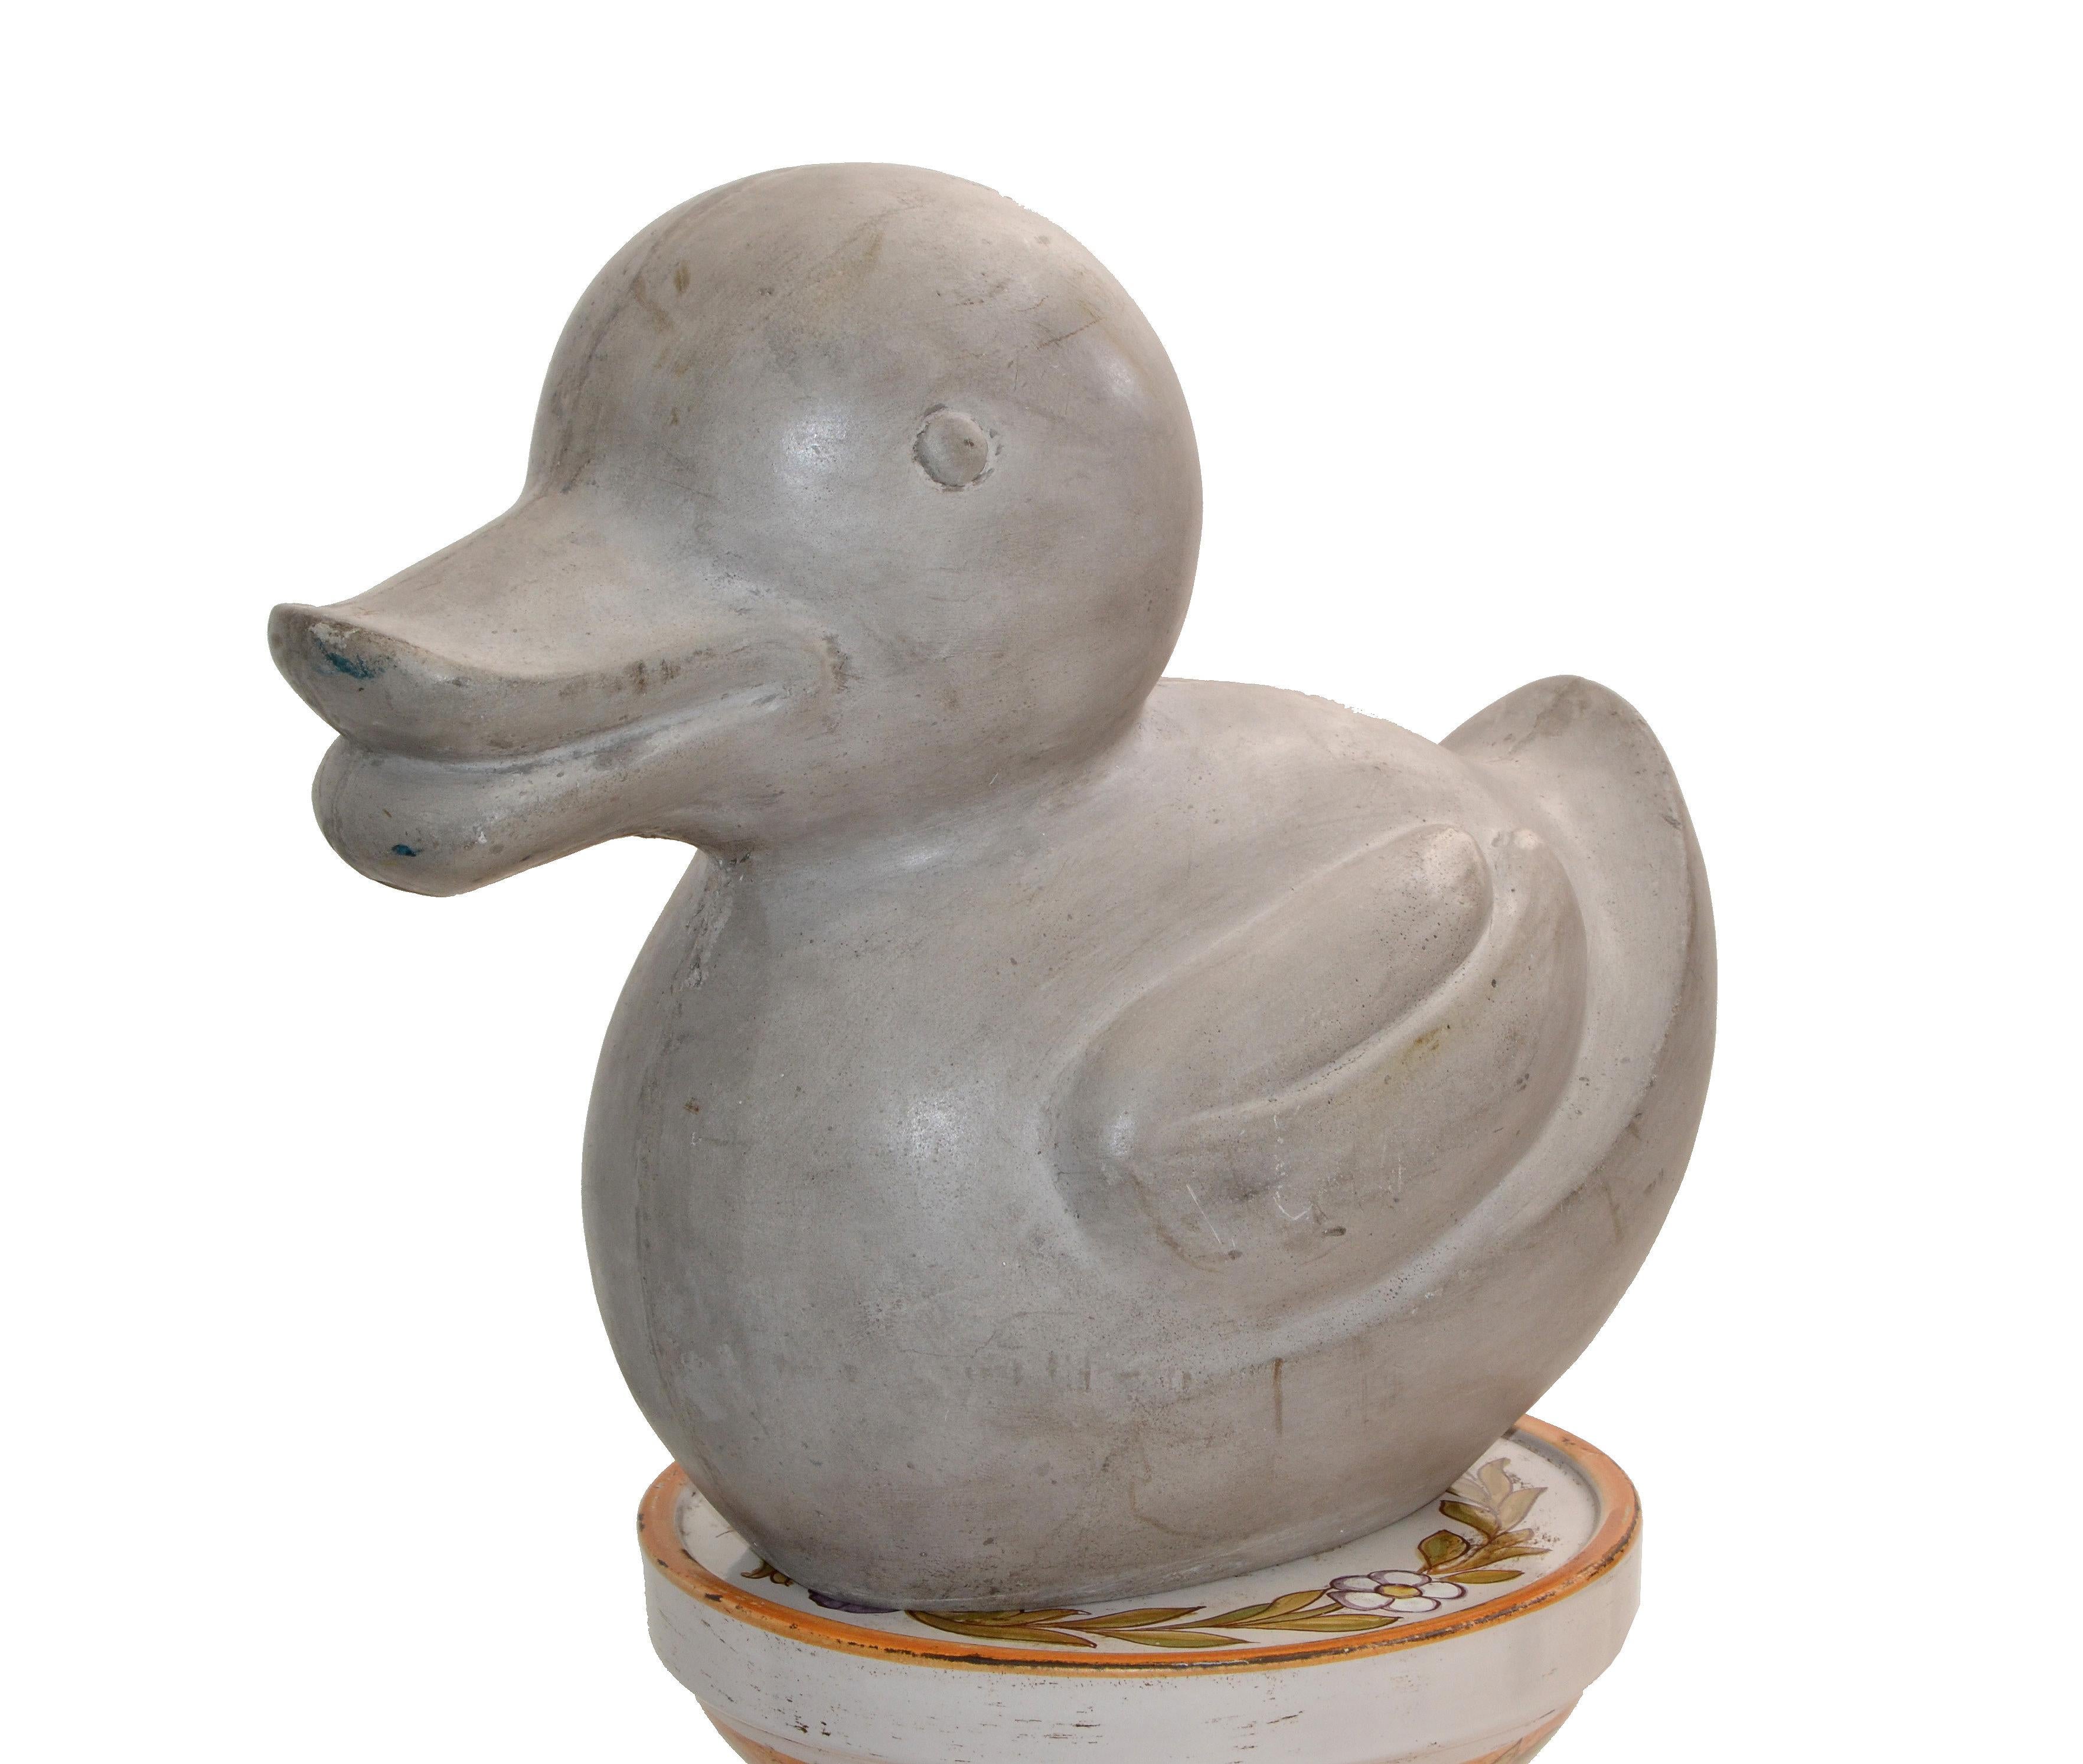 Distressed Look Decorative Handcrafted Cement Mold Duck, Animal Sculpture 1